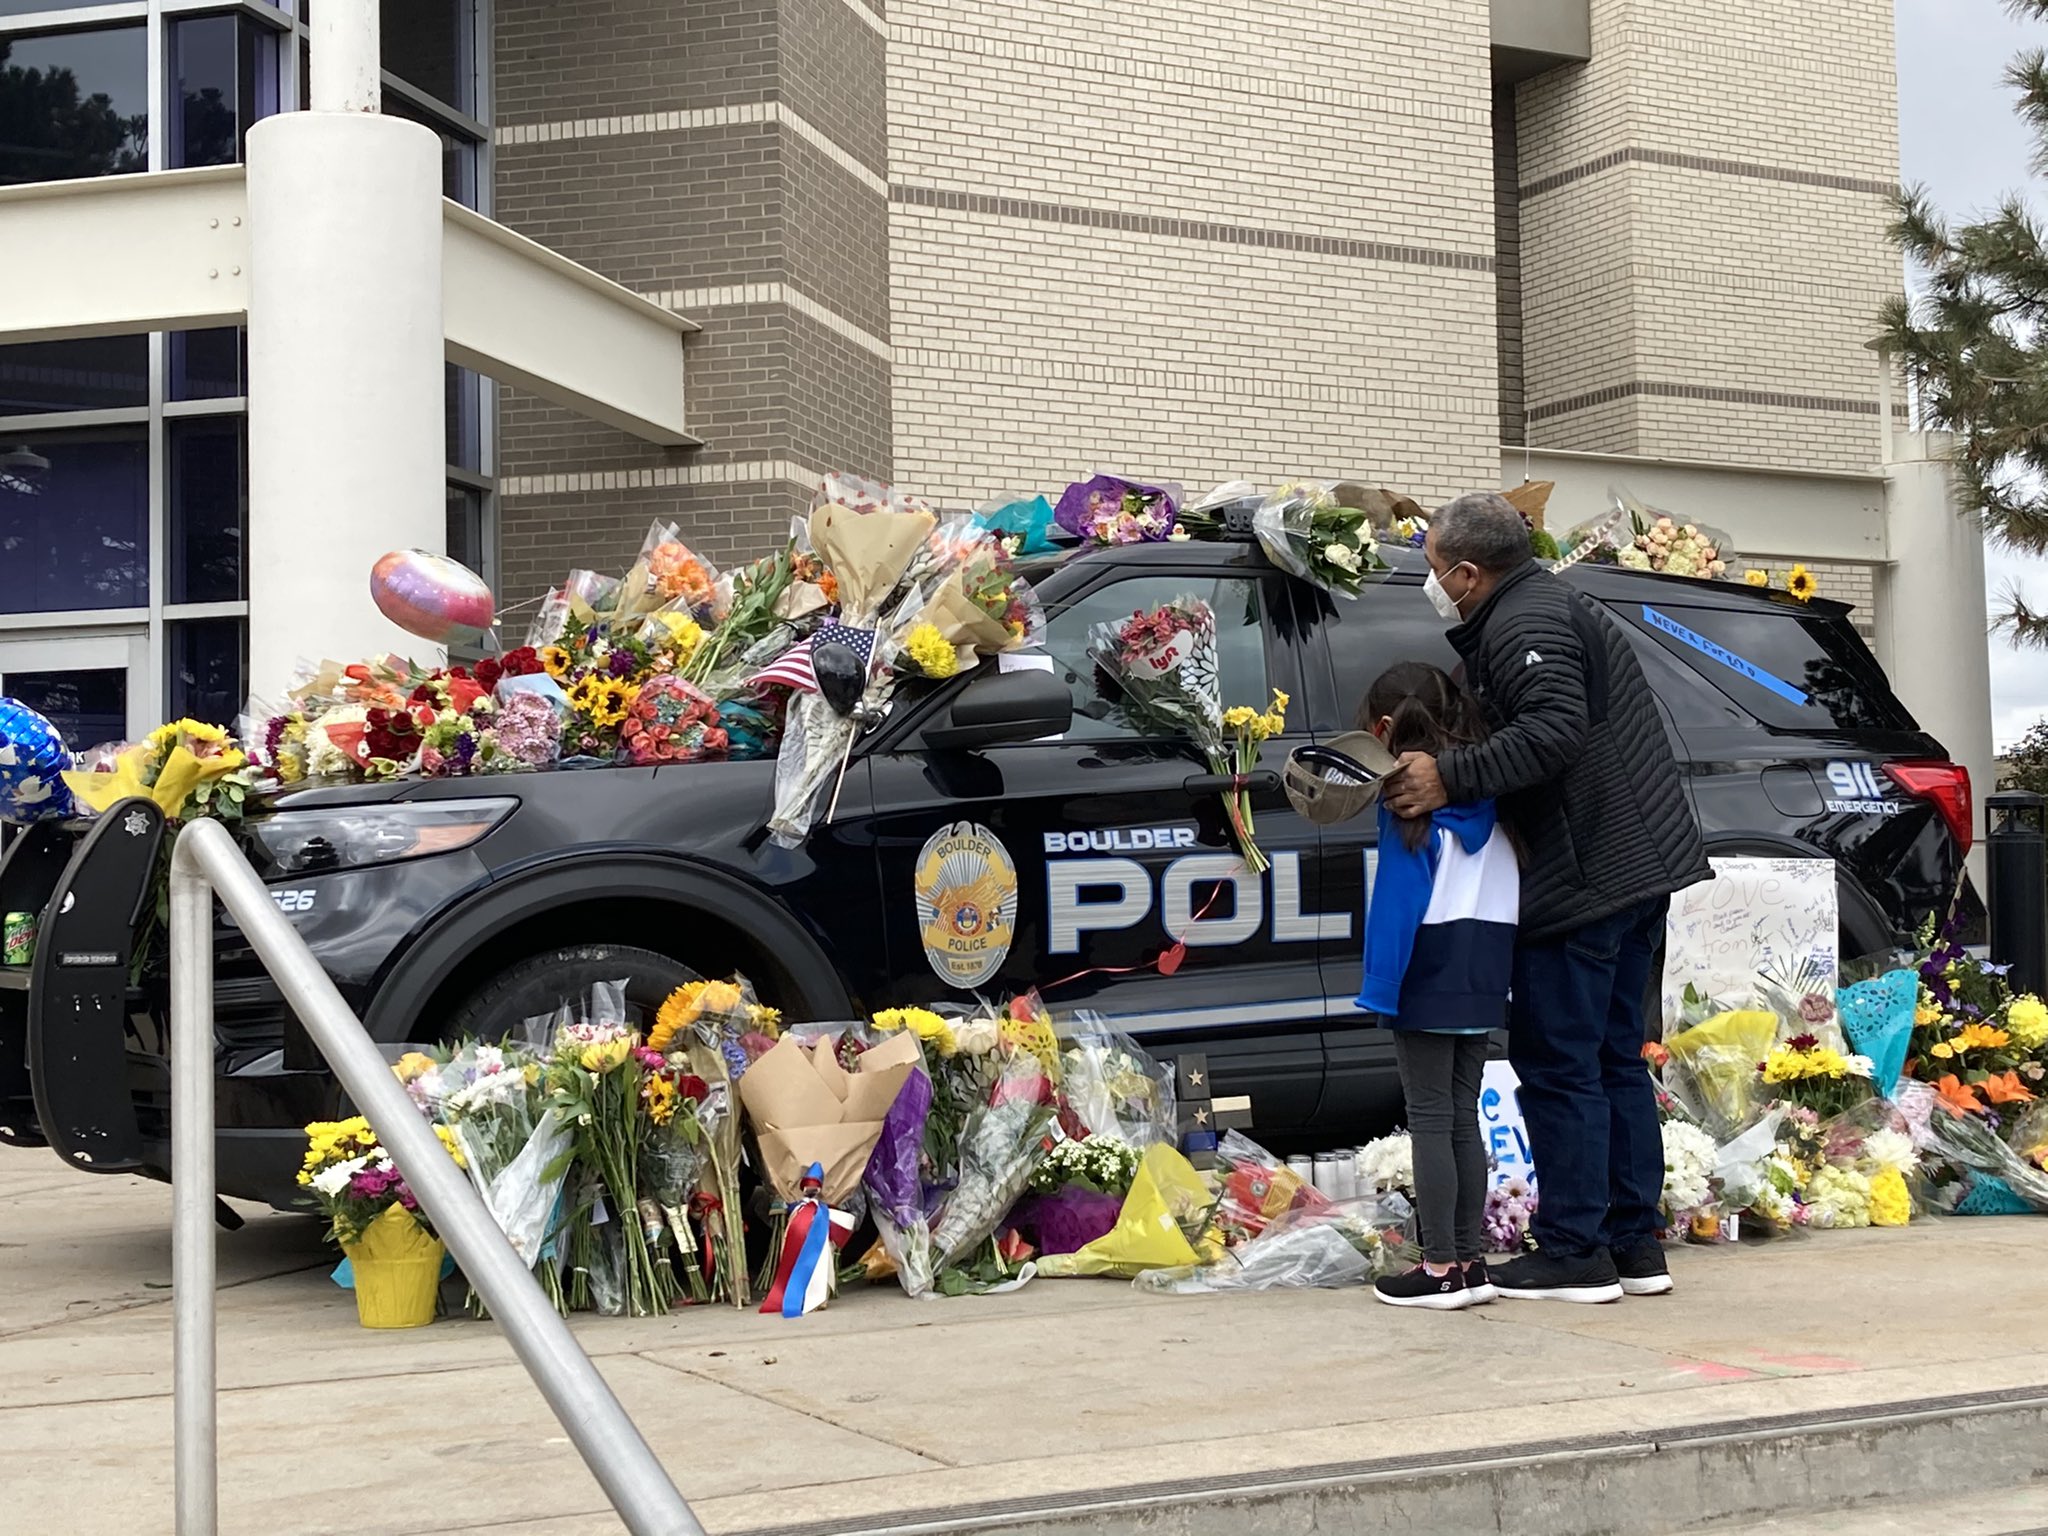 People paying their respects for the police officer who died during the mass shooting on March 22 | Source: Twitter/@boulderpolice 